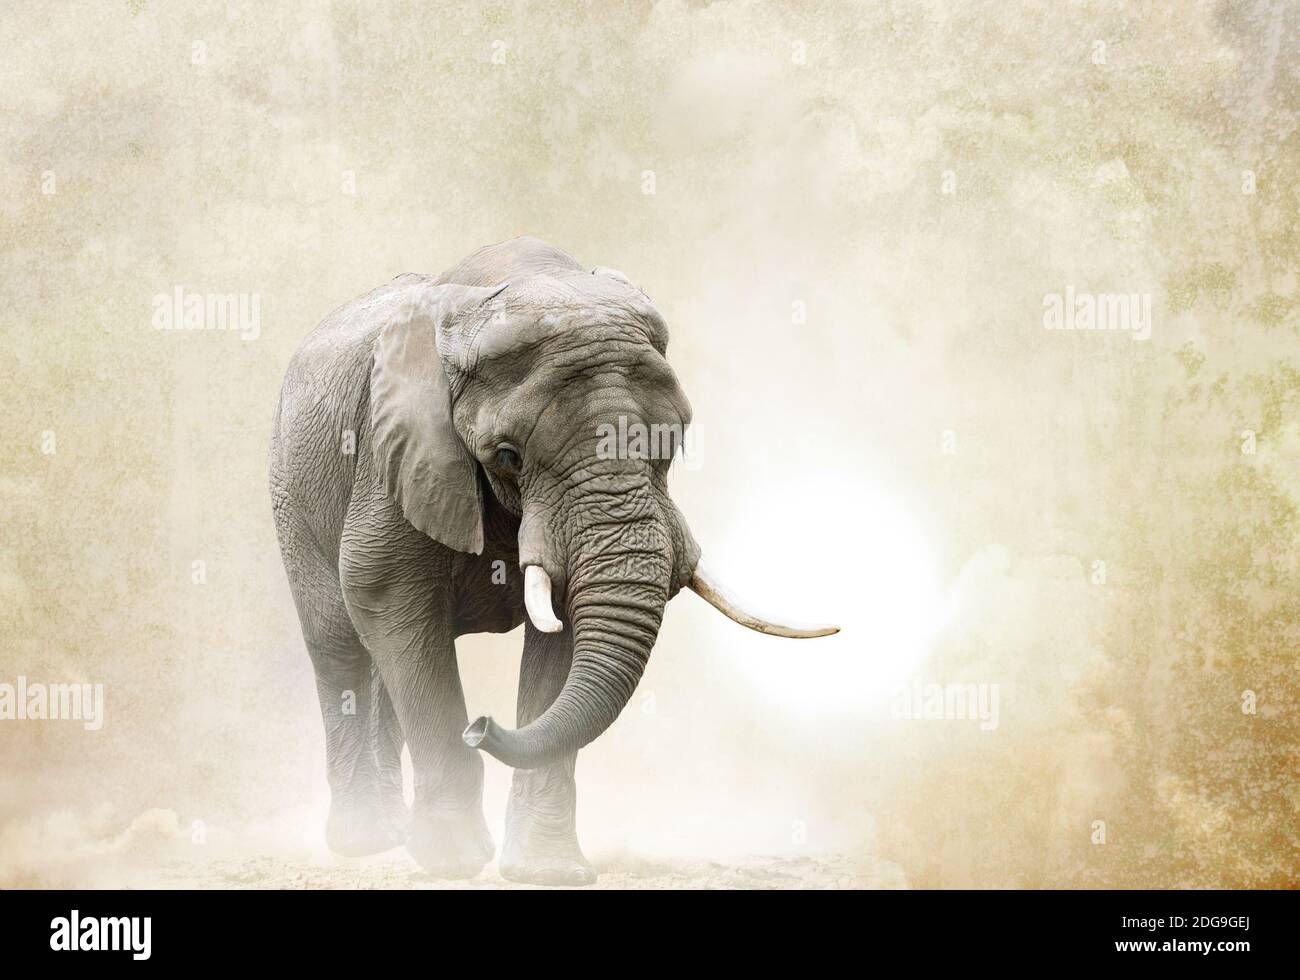 african elephant walking in desert over a grunge background Stock Photo